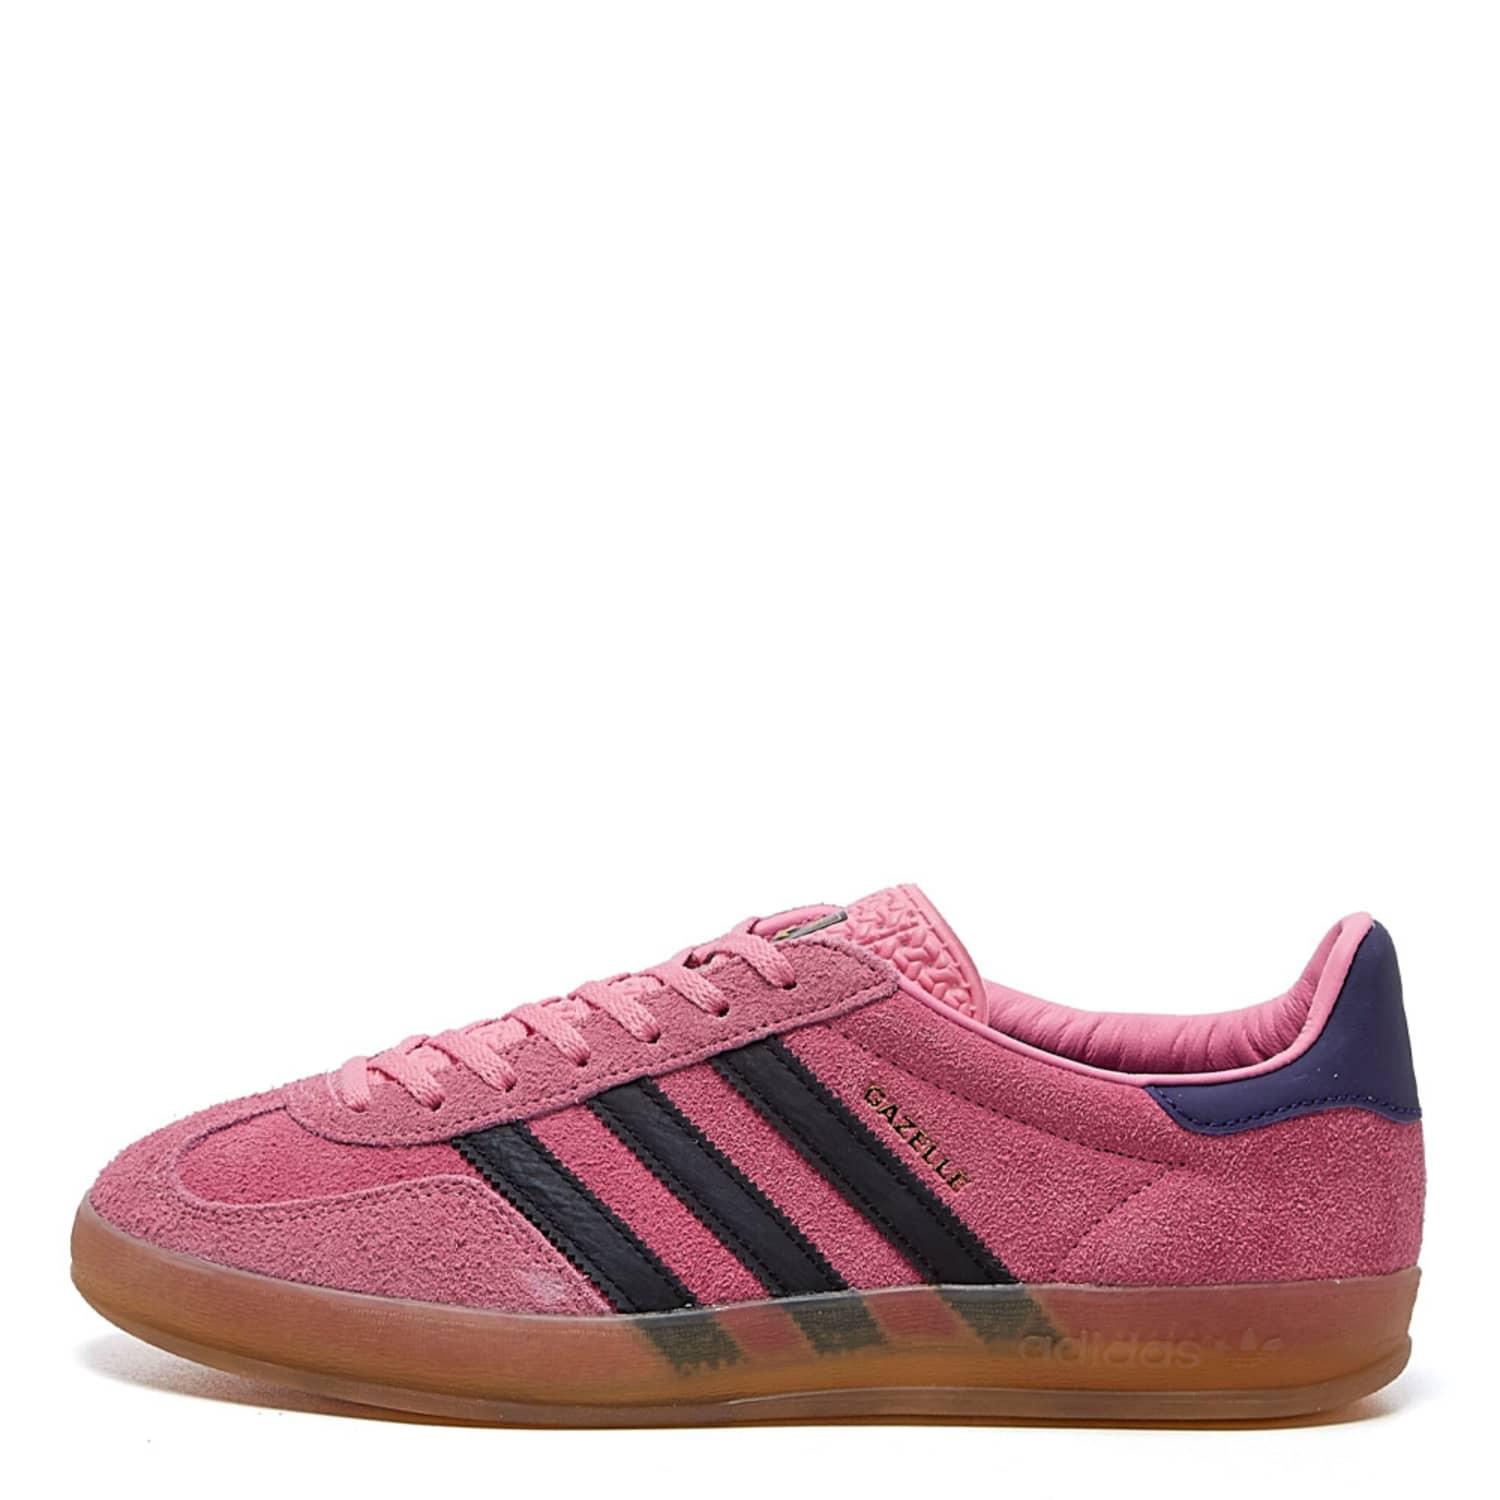 adidas Gazelle Indoor Trainers in Pink | Lyst